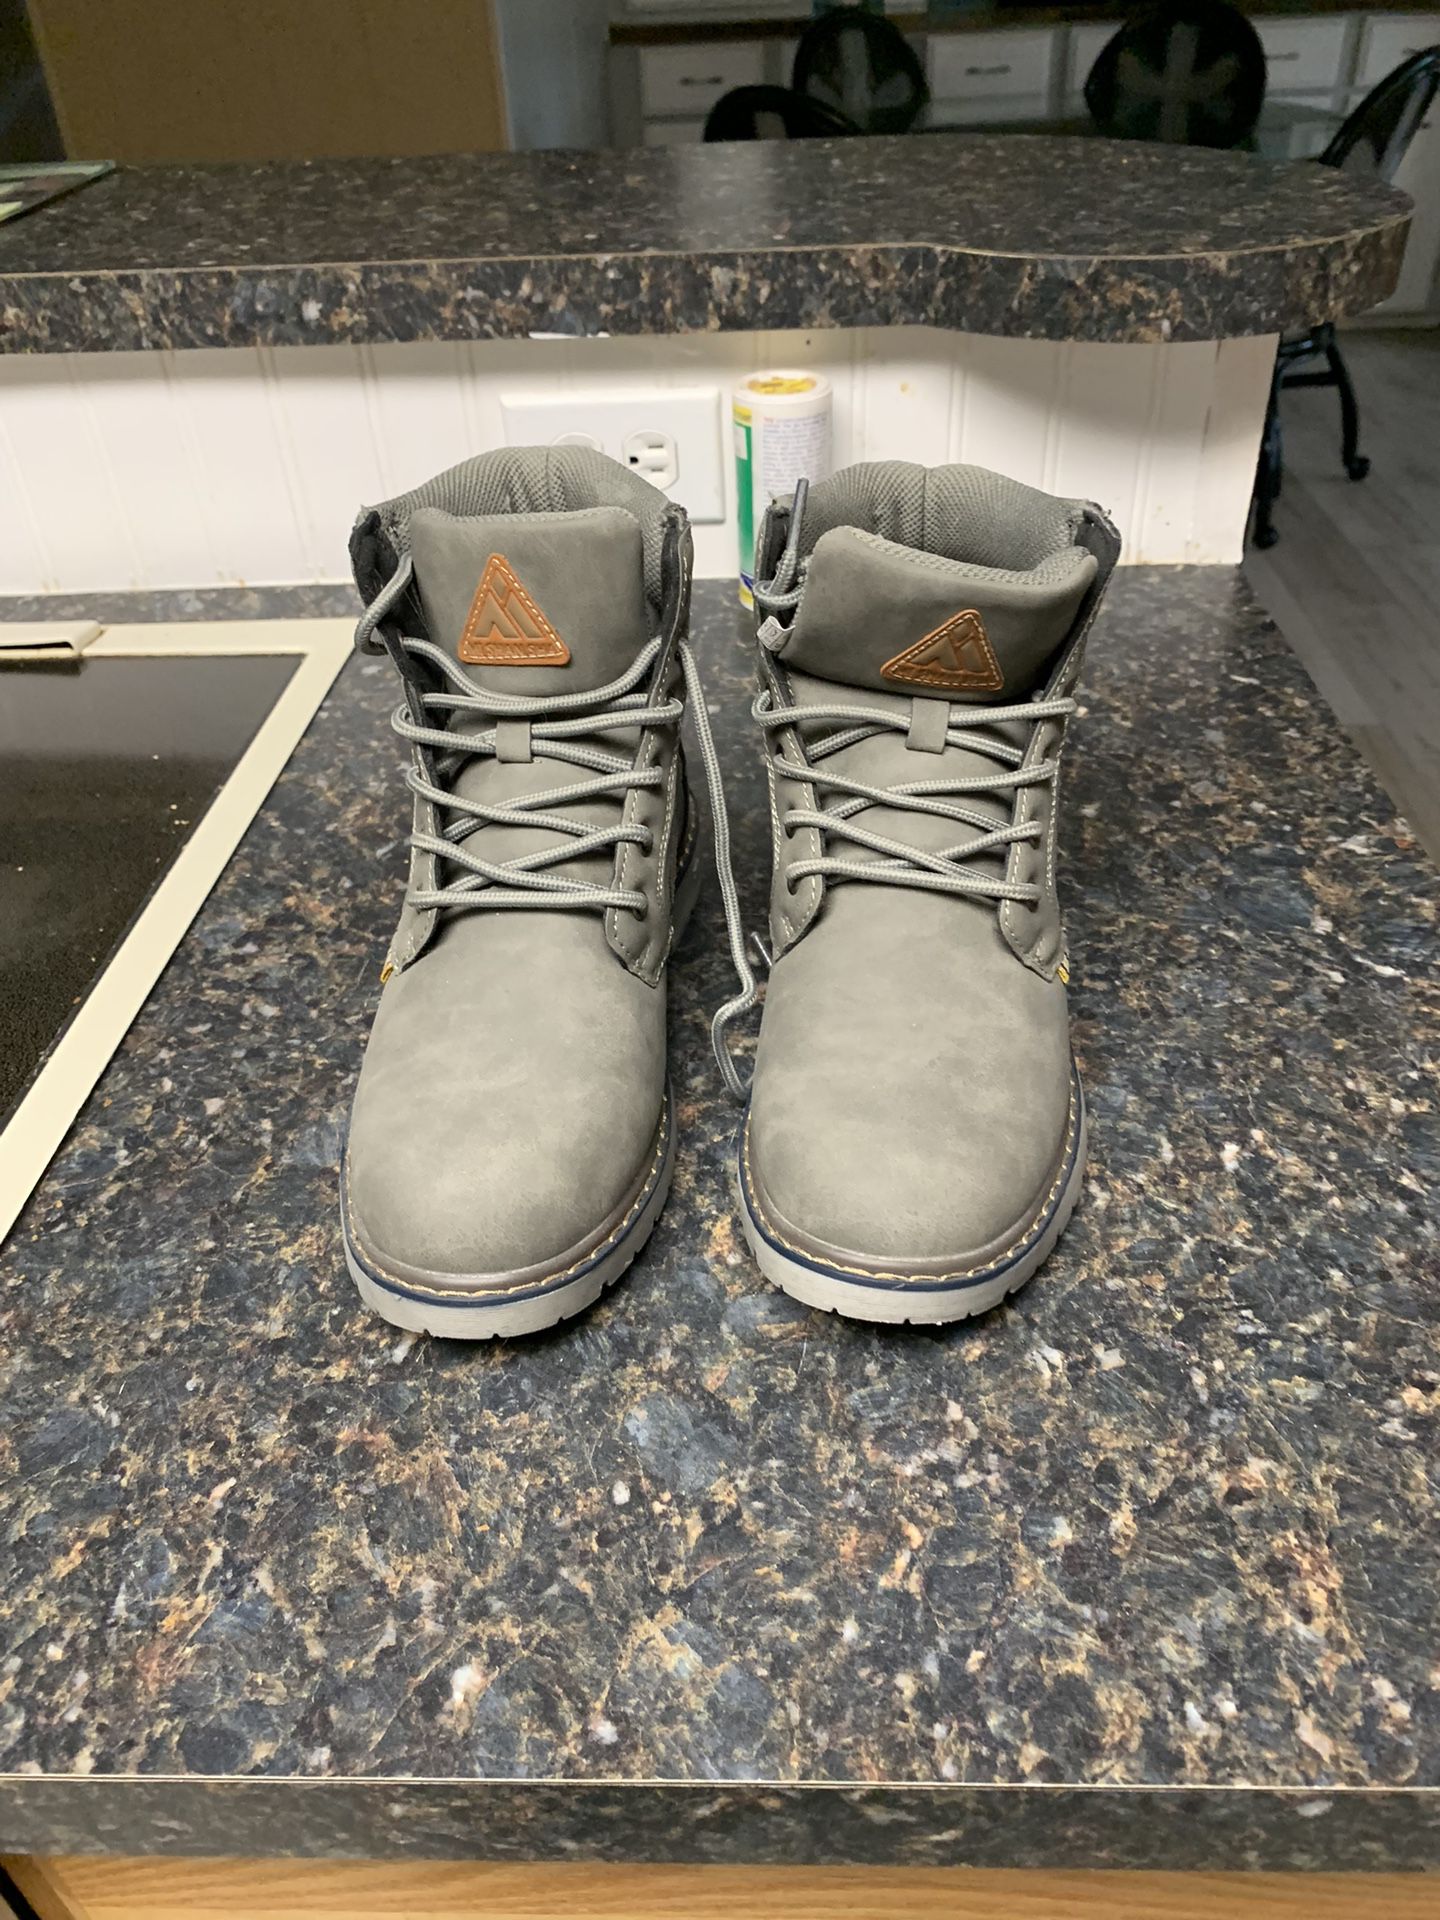 Hiking Boots 